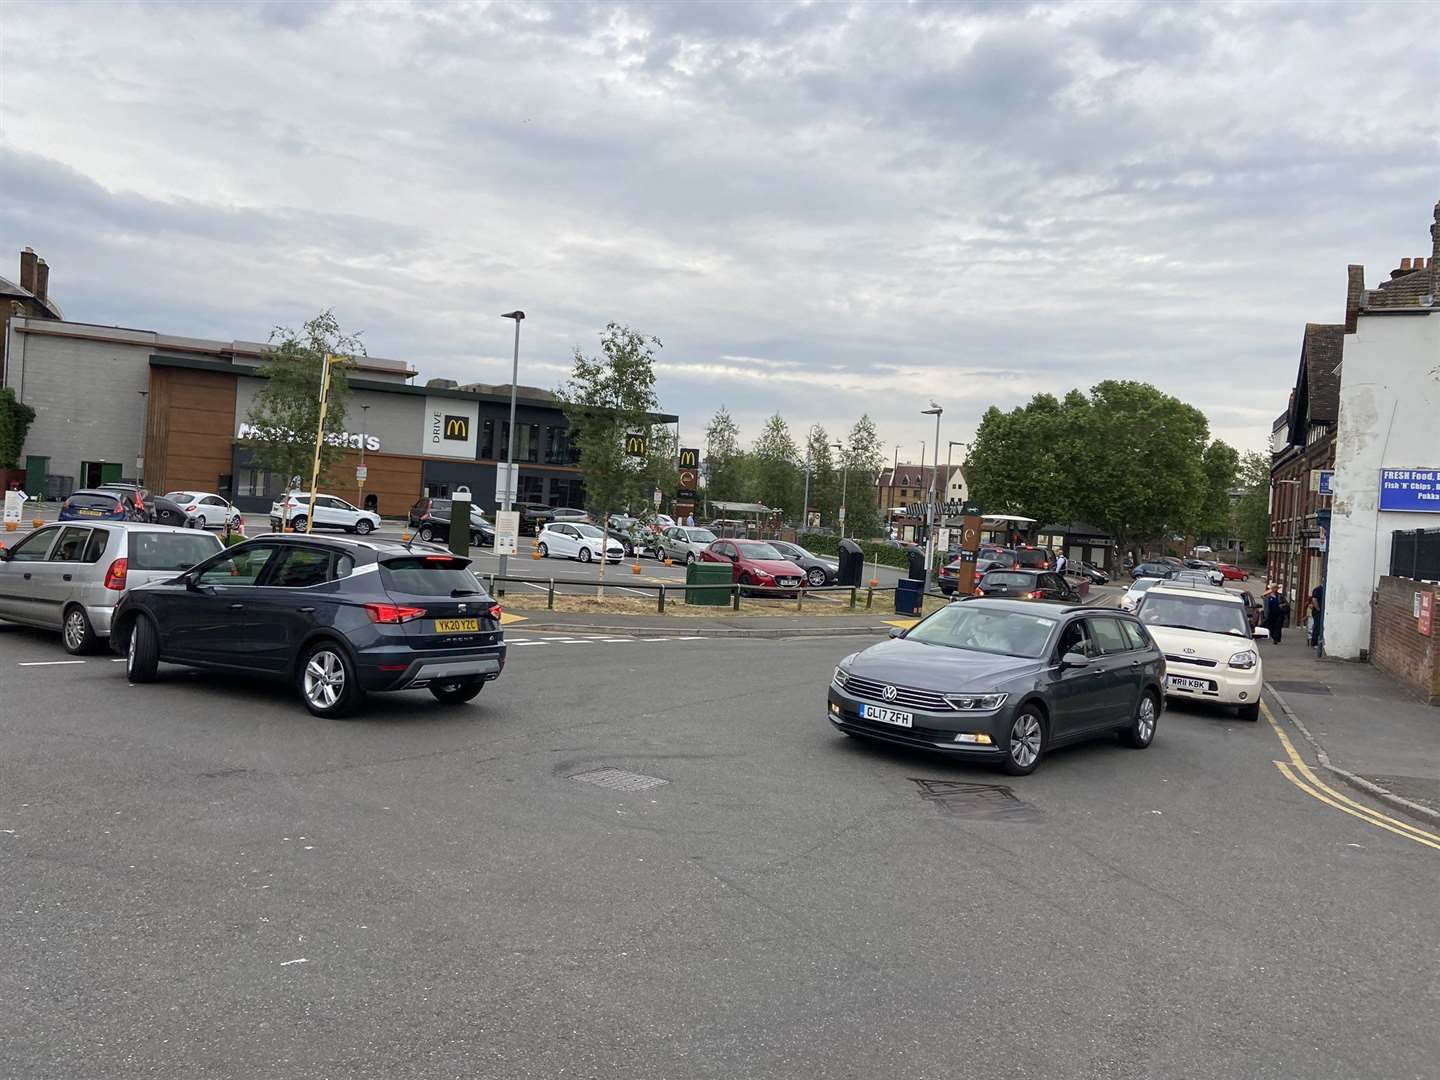 Queues of cars have been seen around the Hart Street McDonald's in Maidstone. Picture: @Jodes_ox